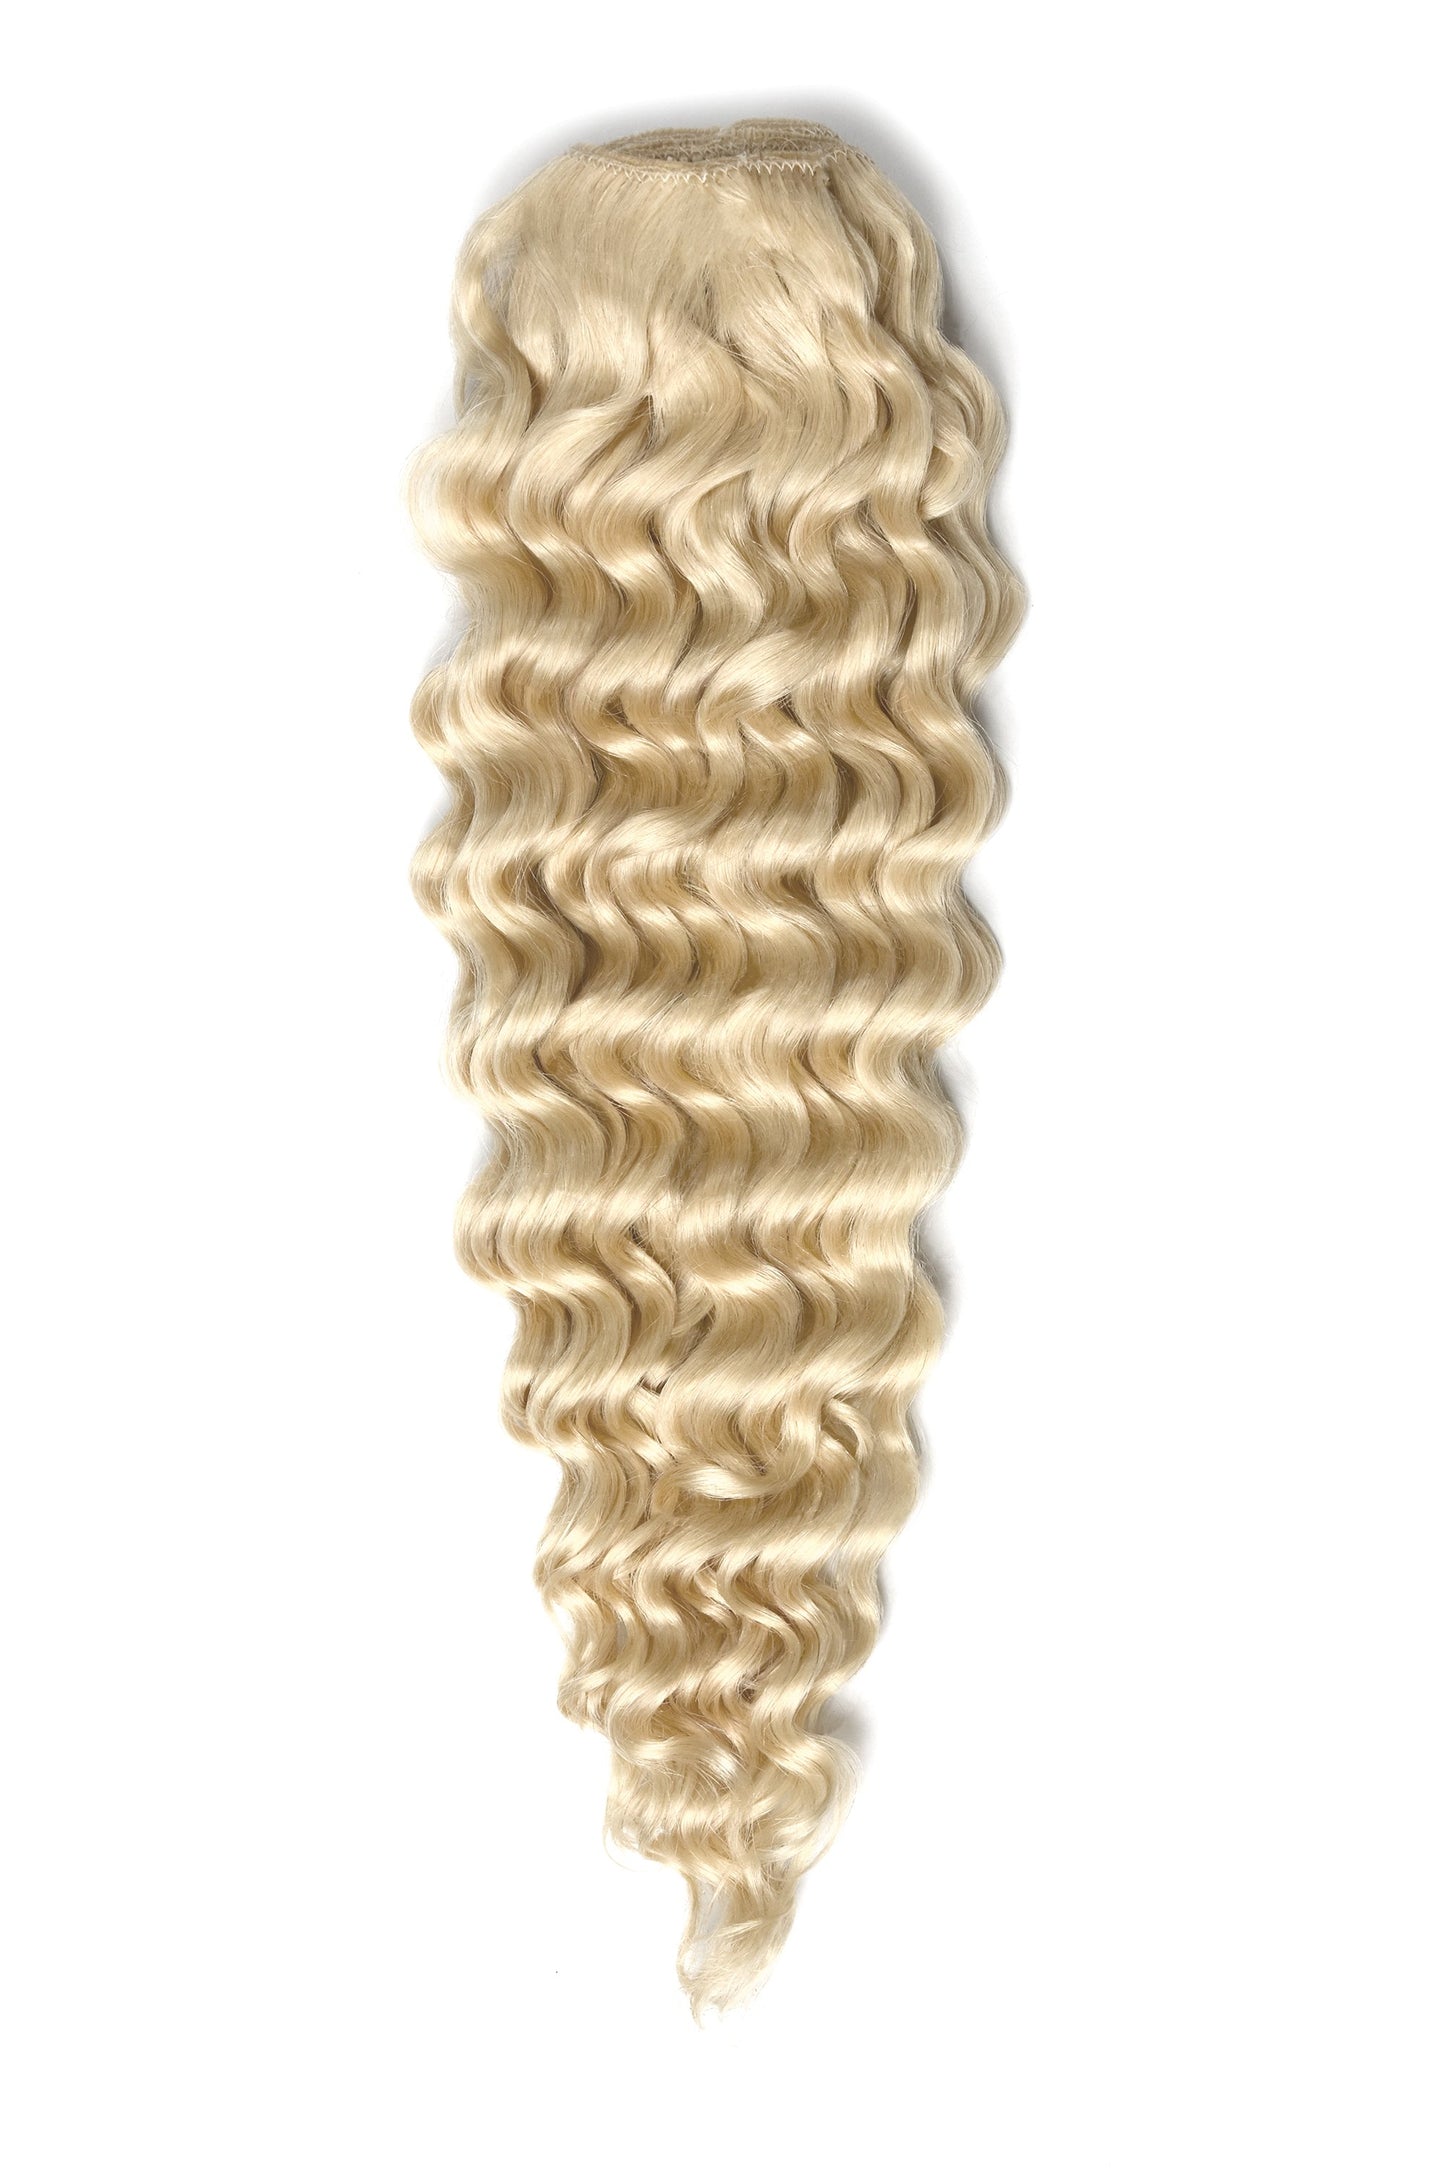 Curly Clip-In Echthaar Extensions - Hellstes Blond (60)